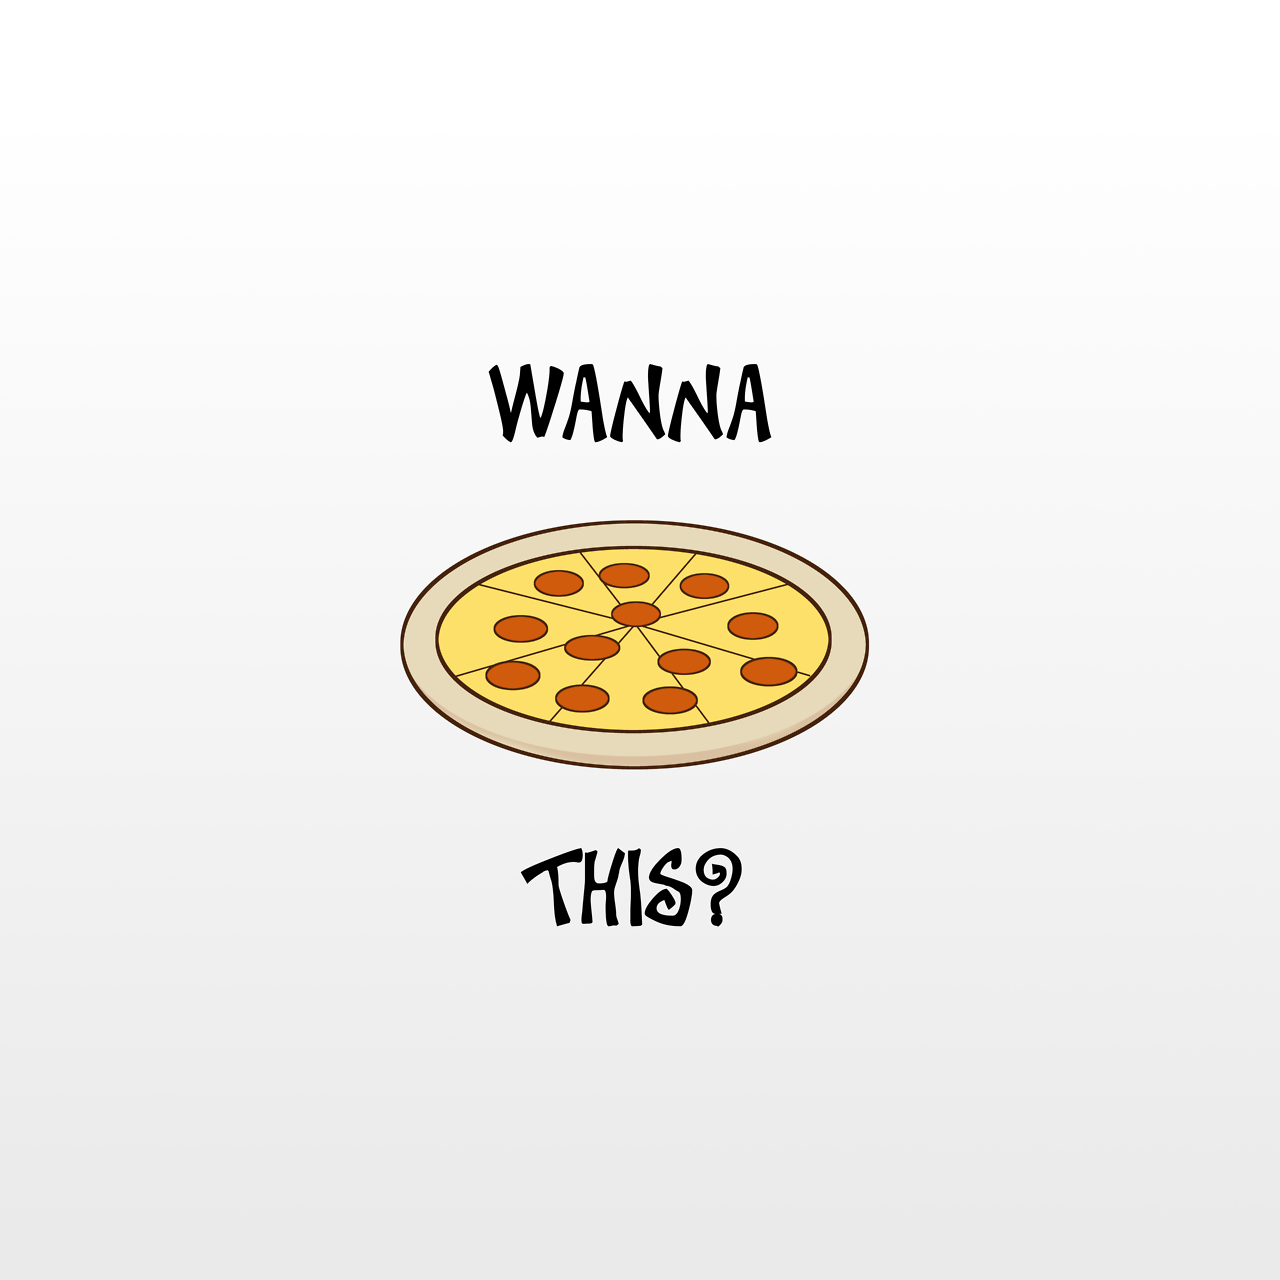 Food Pun Wallpaper For Any Type Of Phone If Bie